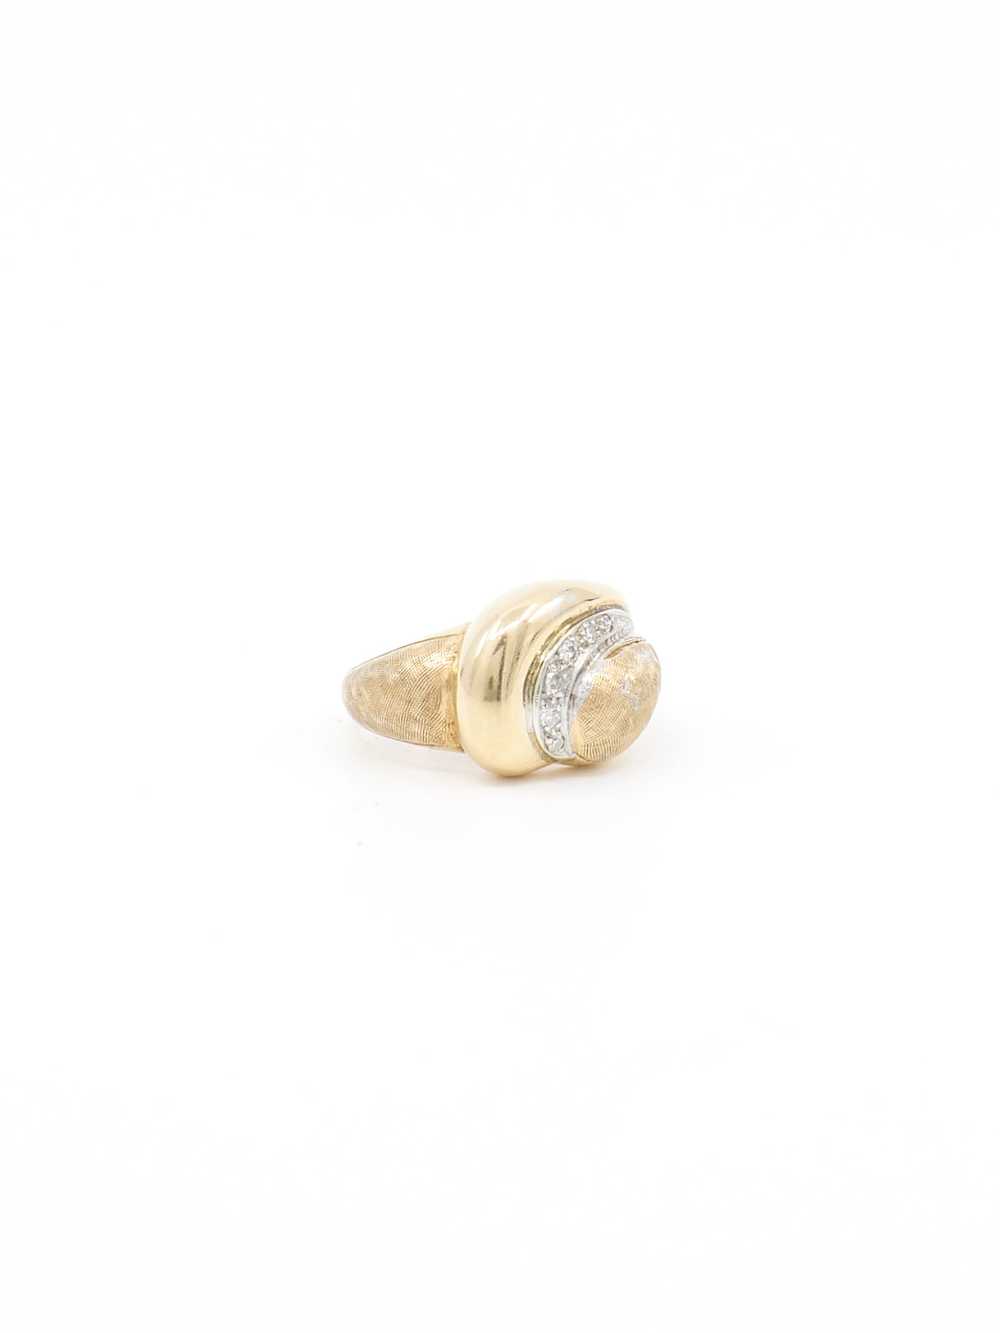 14k Diamond Accented Dome Ring - image 3